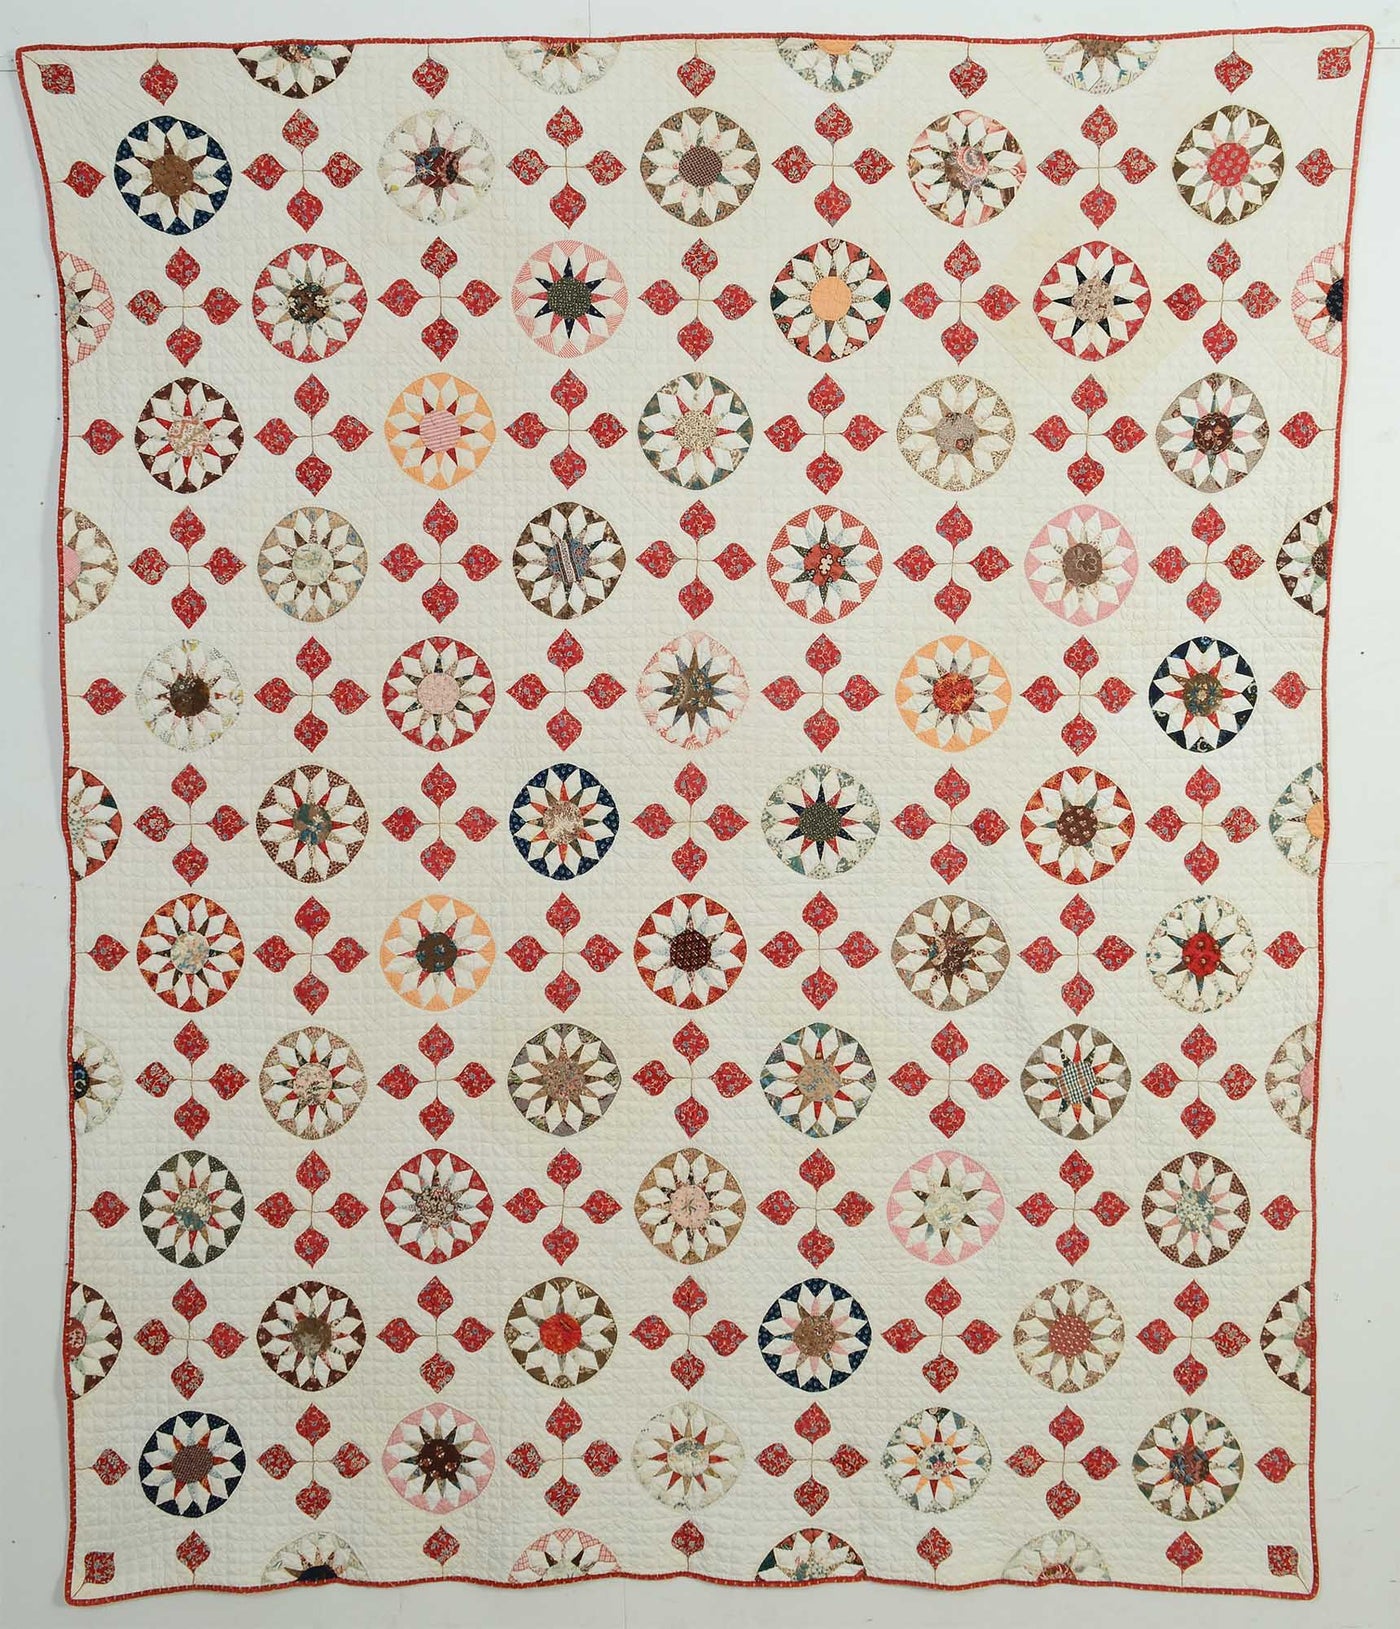 rising-sun-and-hearts-quilt-1453402